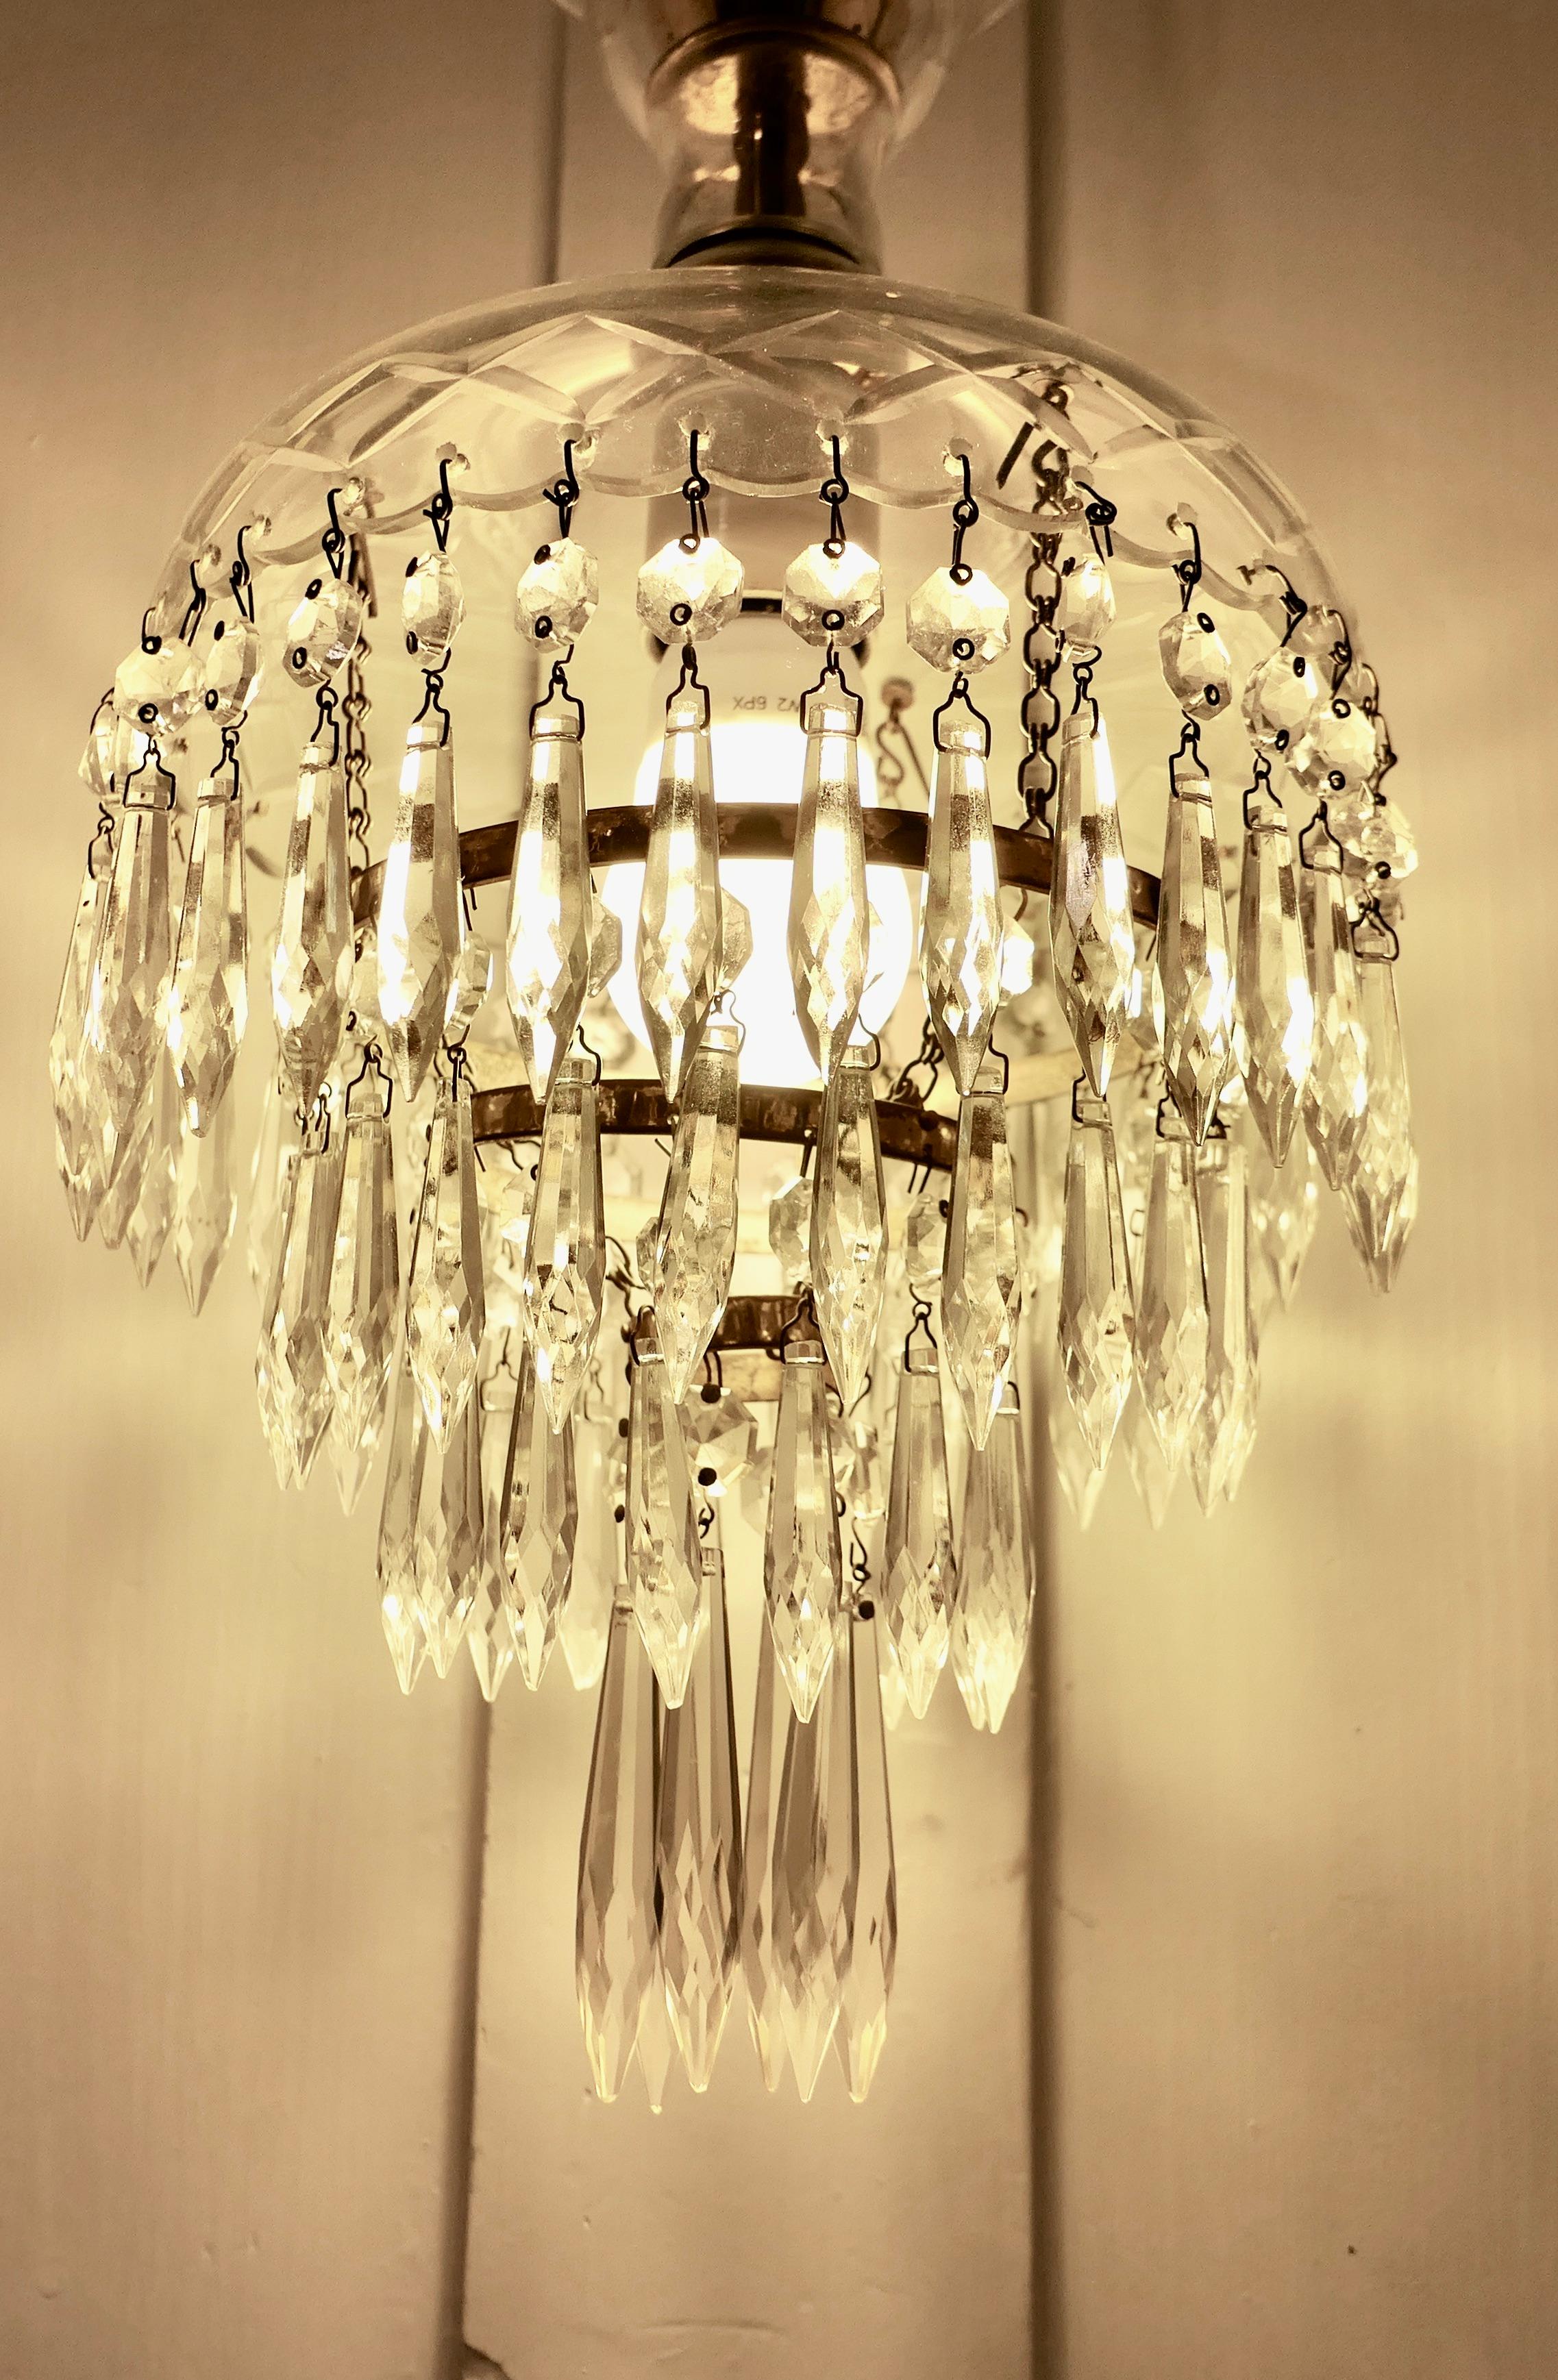 Large French Waterfall Crystal Chandelier

This is a very pretty crystal chandelier, the top has an etched Glass Dome  
The hanging waterfall is suspended from the glass crown with chains of crystal beads, this piece is very attractive when lit 
The